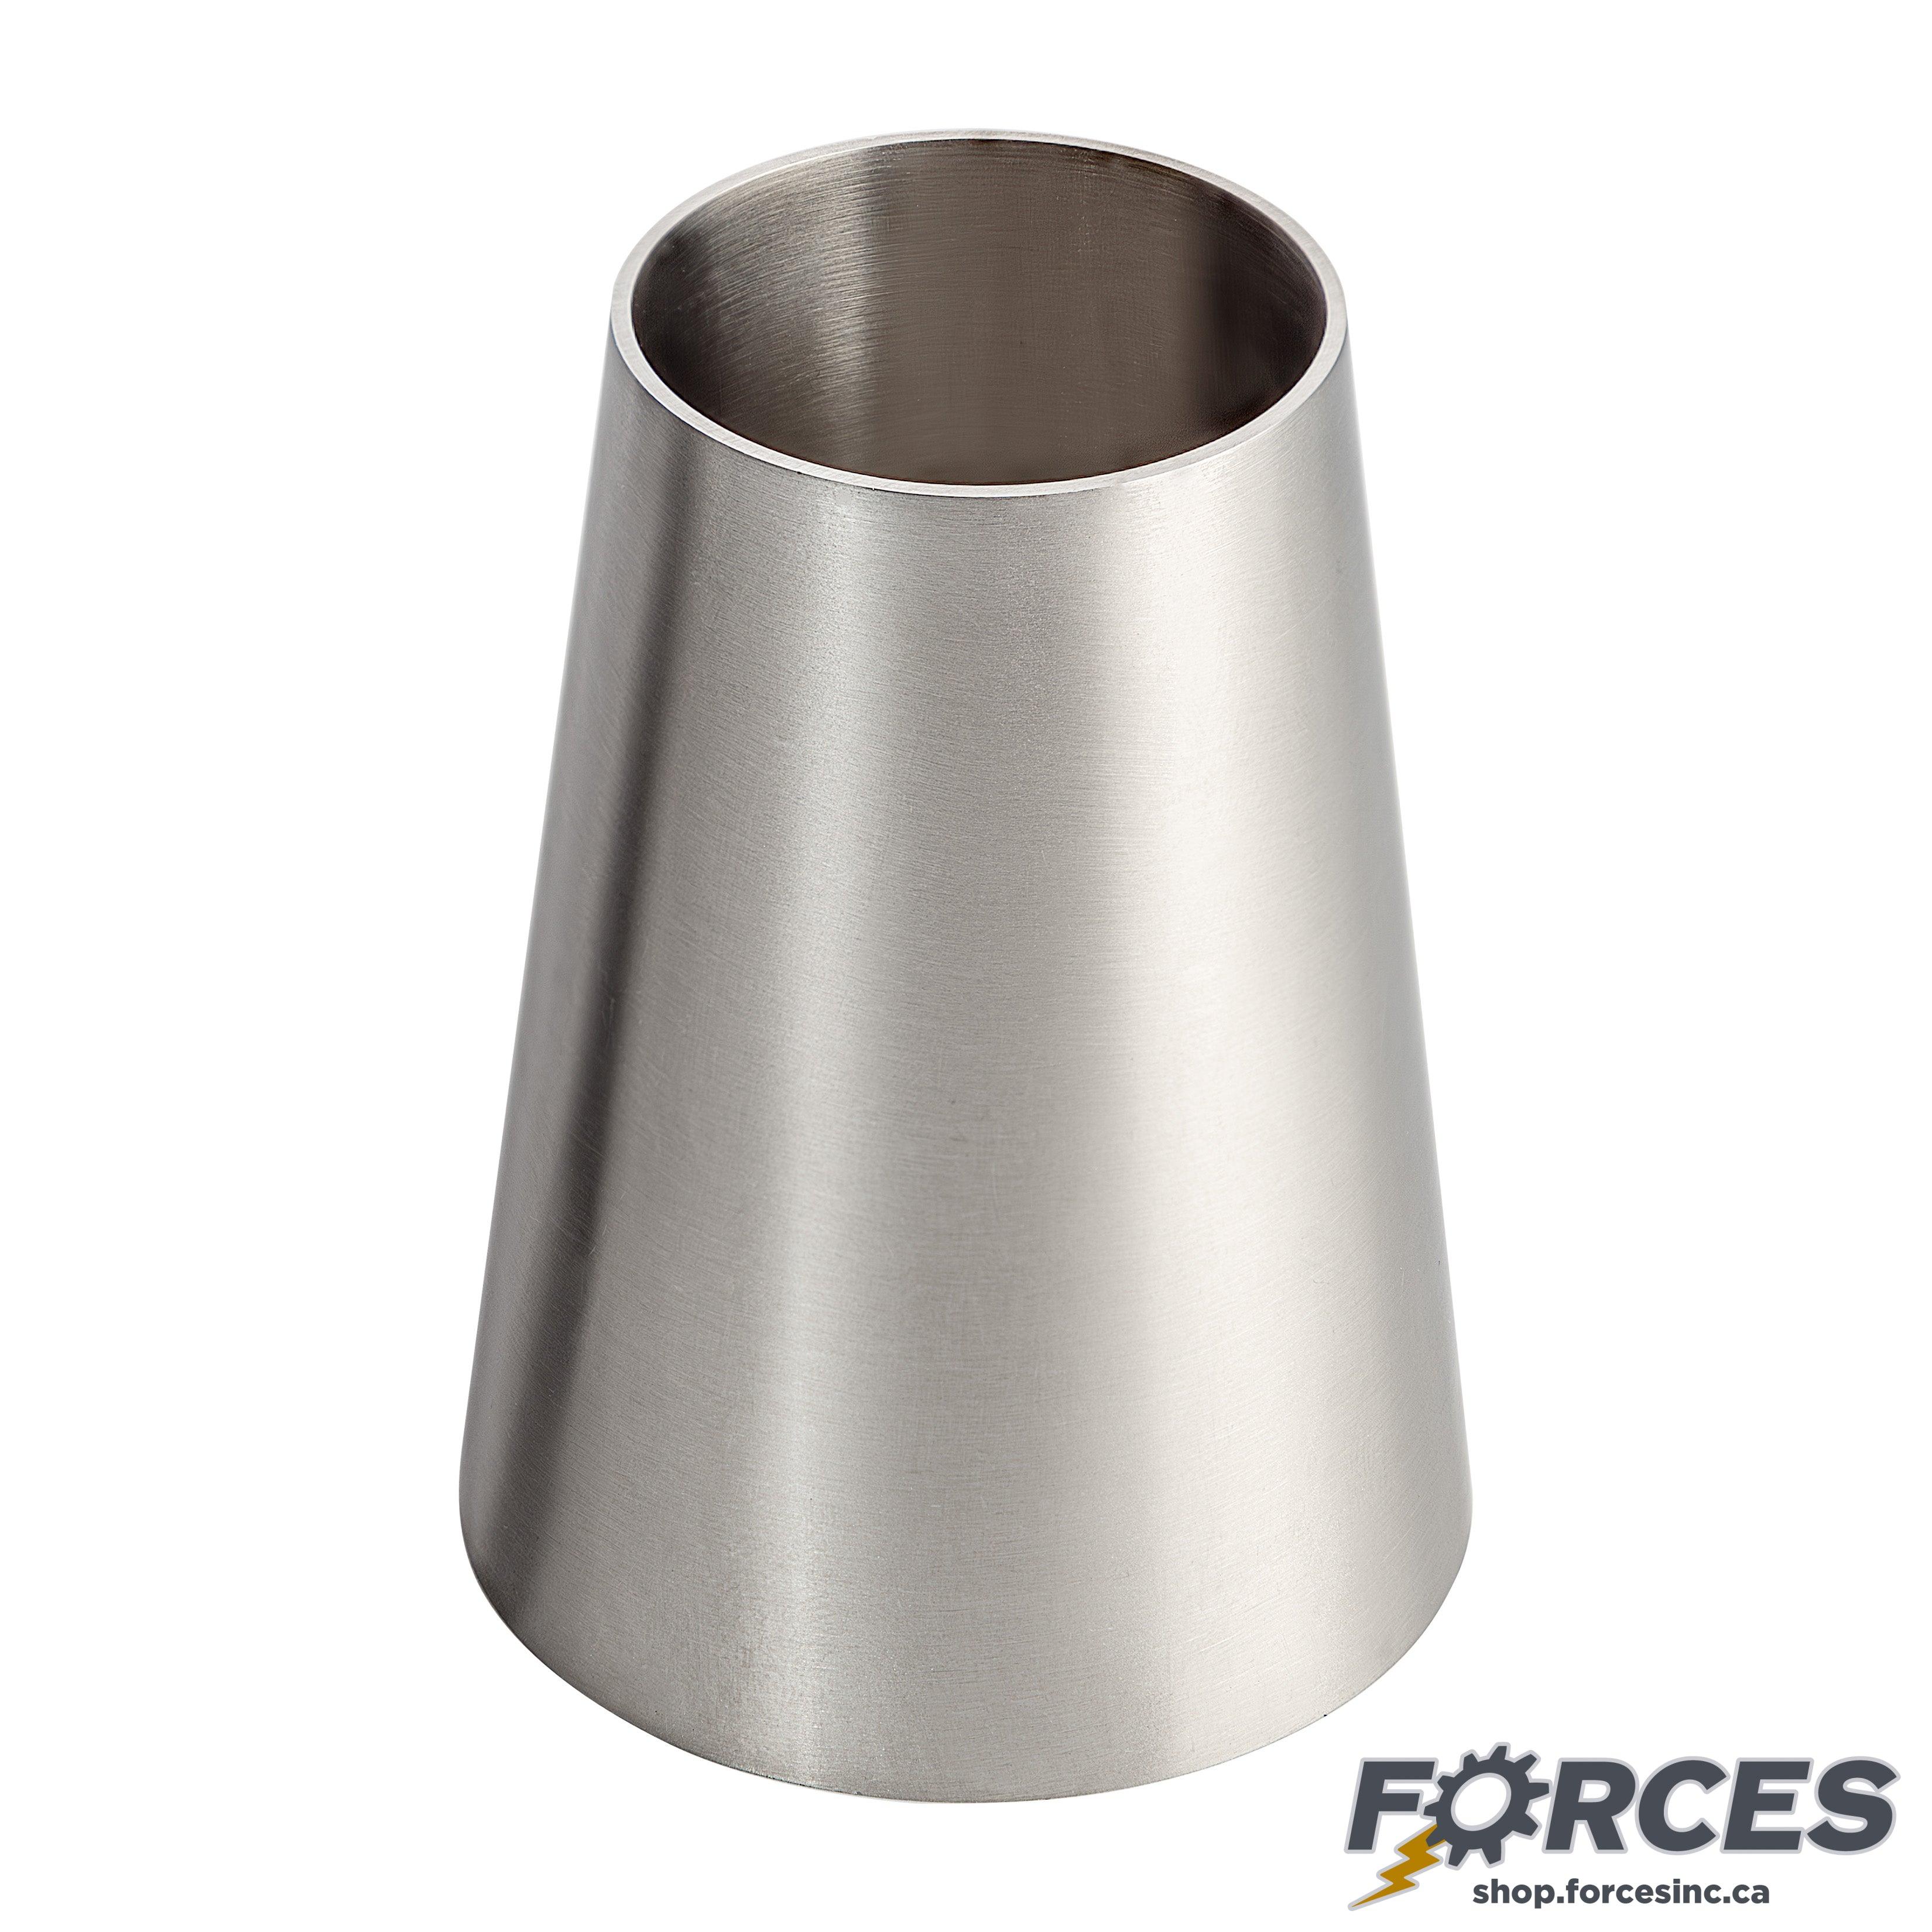 2" x 1" Butt Weld Concentric Reducer - Stainless Steel 316 - Forces Inc